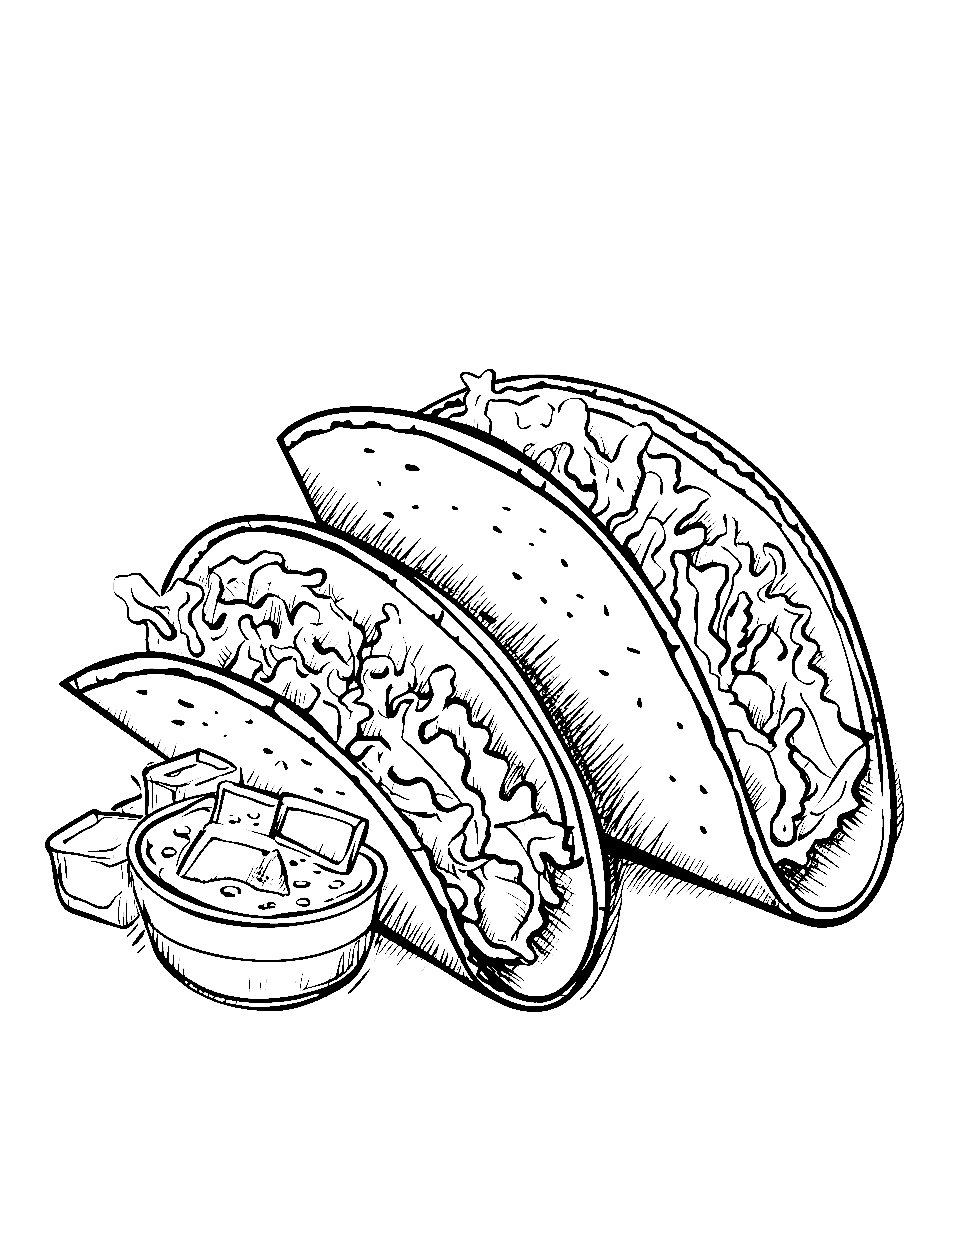 Tacos Fiesta Food Coloring Page - Tacos filled with beans, cheese, and salsa.